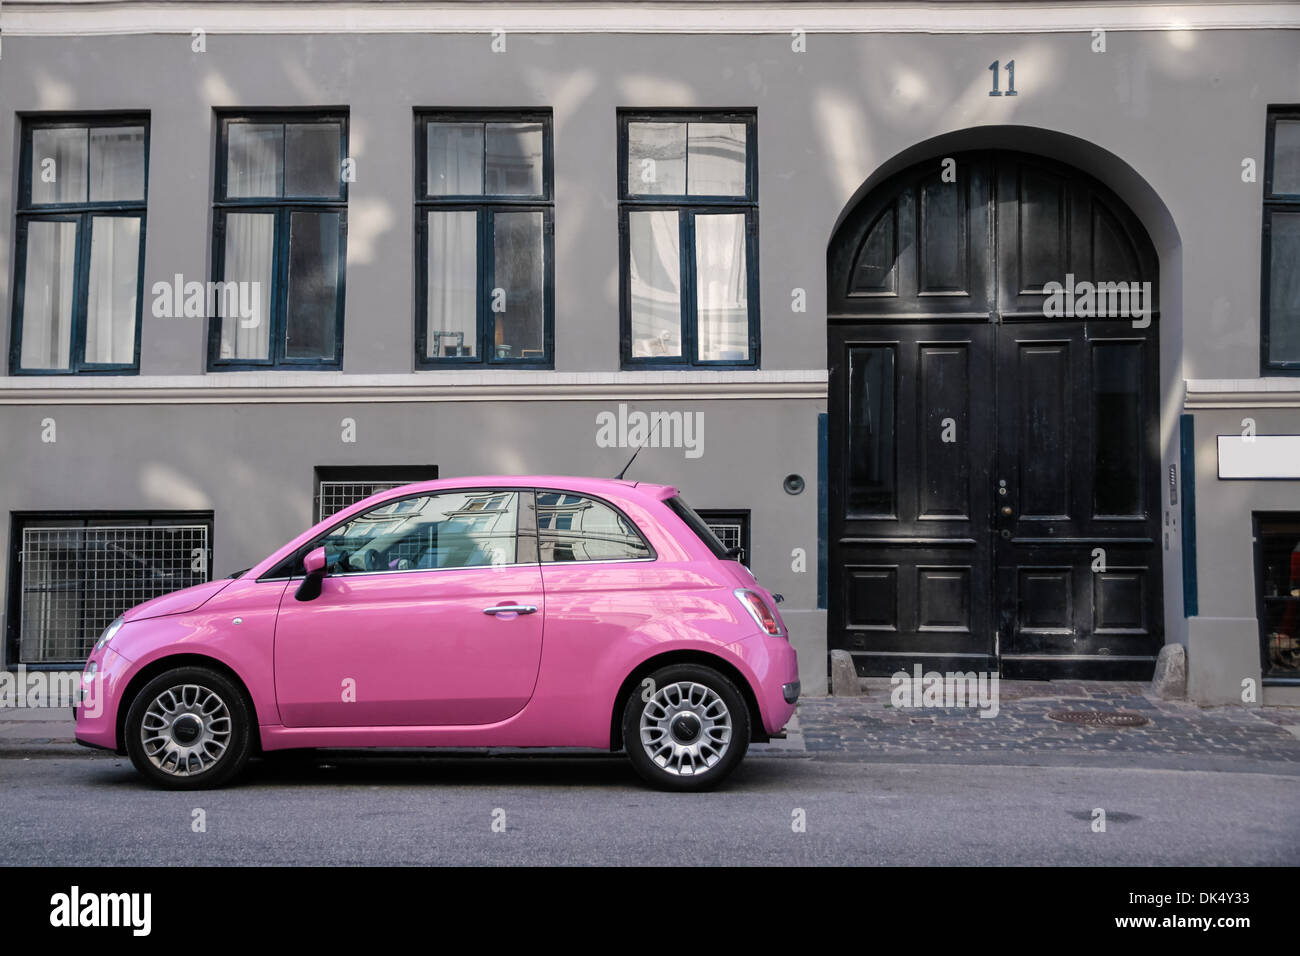 Funny pink car in front of a gray house in Copenhagen, Denmark Stock Photo